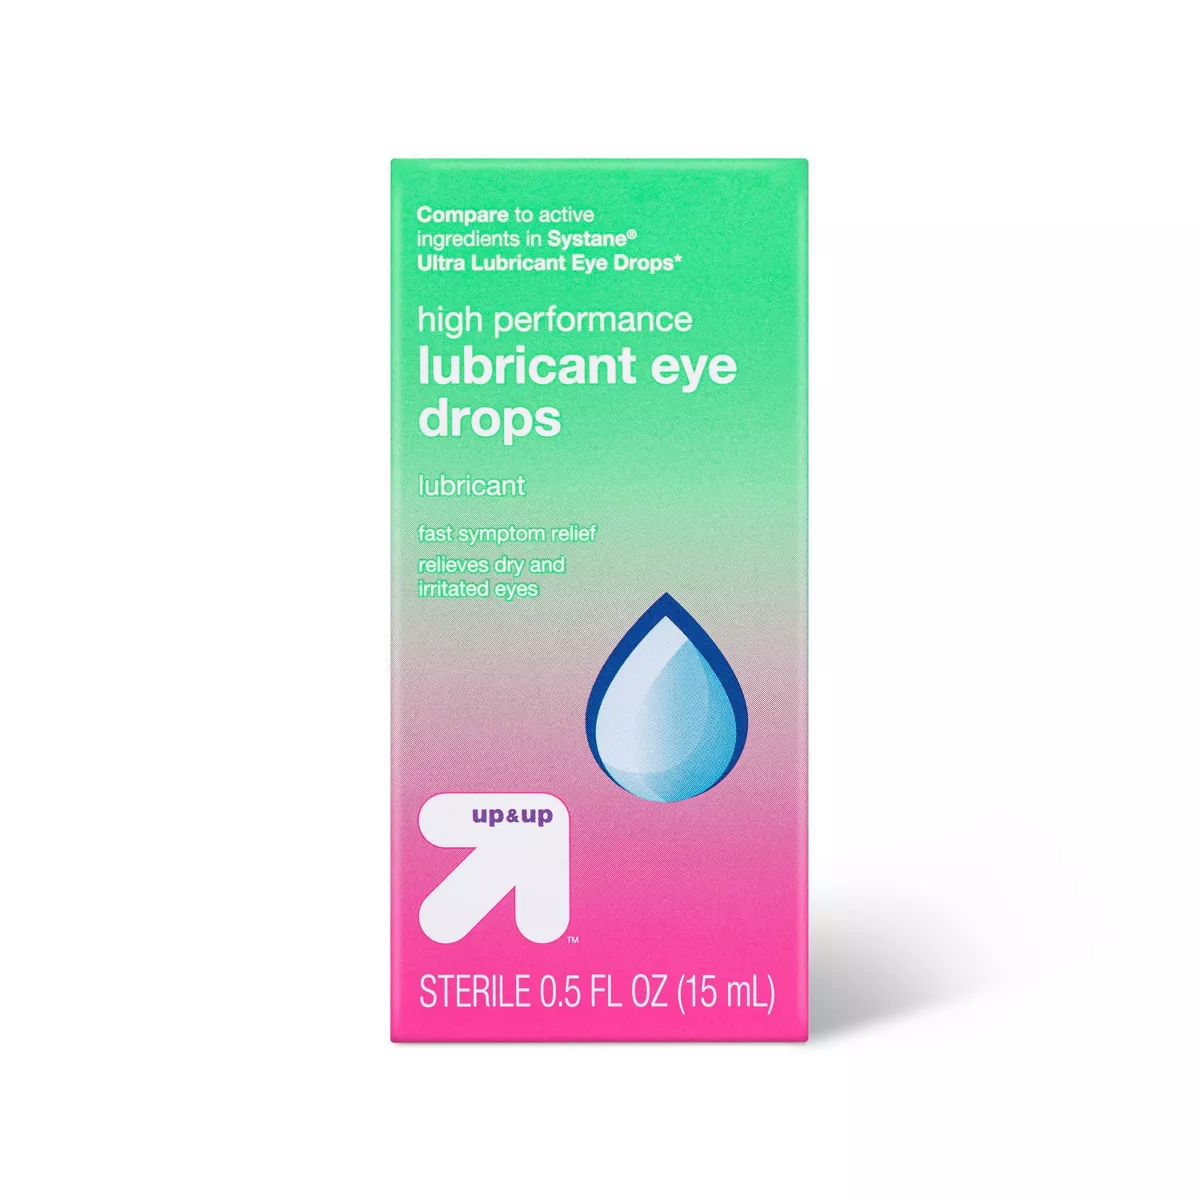 Up & Up High Performance Lubricant Eye Drops 15 ml (Single Pack) 